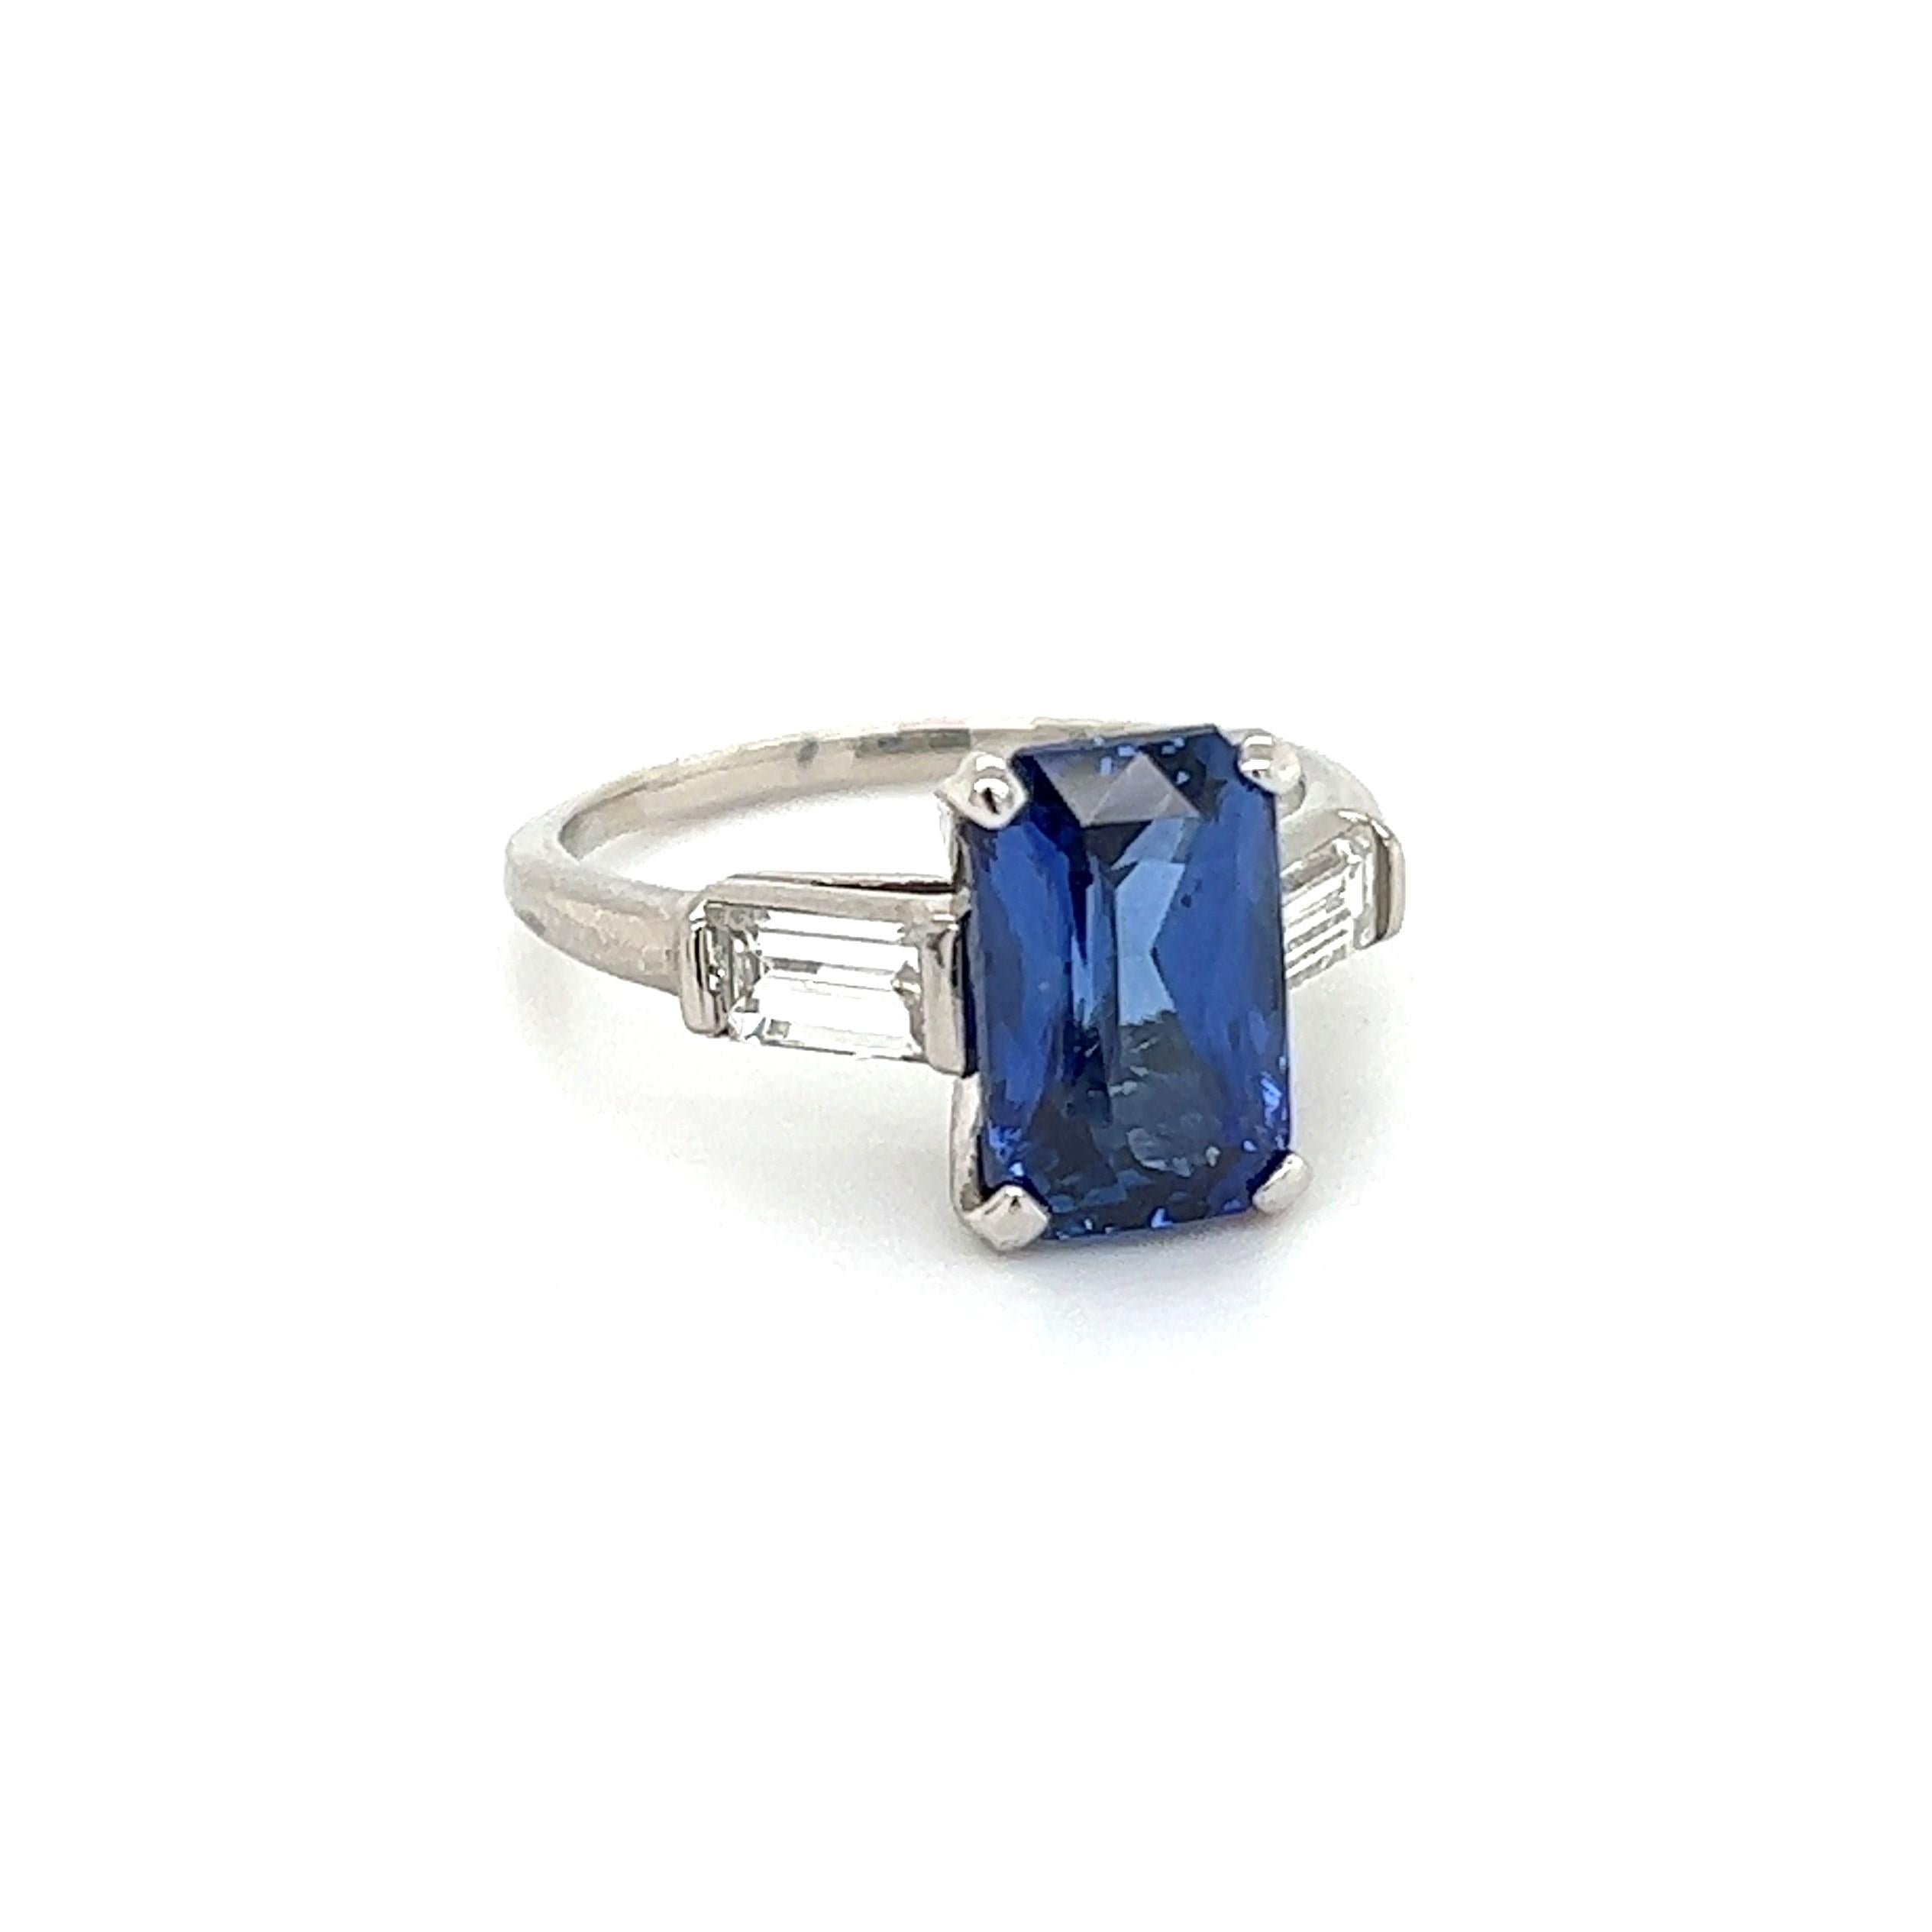 Simply Beautiful! Finely detailed Awesome Platinum Ring, center securely nestled with a Cushion-cut Blue Sapphire weighing approx. 4.15 Carat. GIA #1226168071 lab report. Hand set with Diamonds on either side, weighing approx. 0.46 total Carat